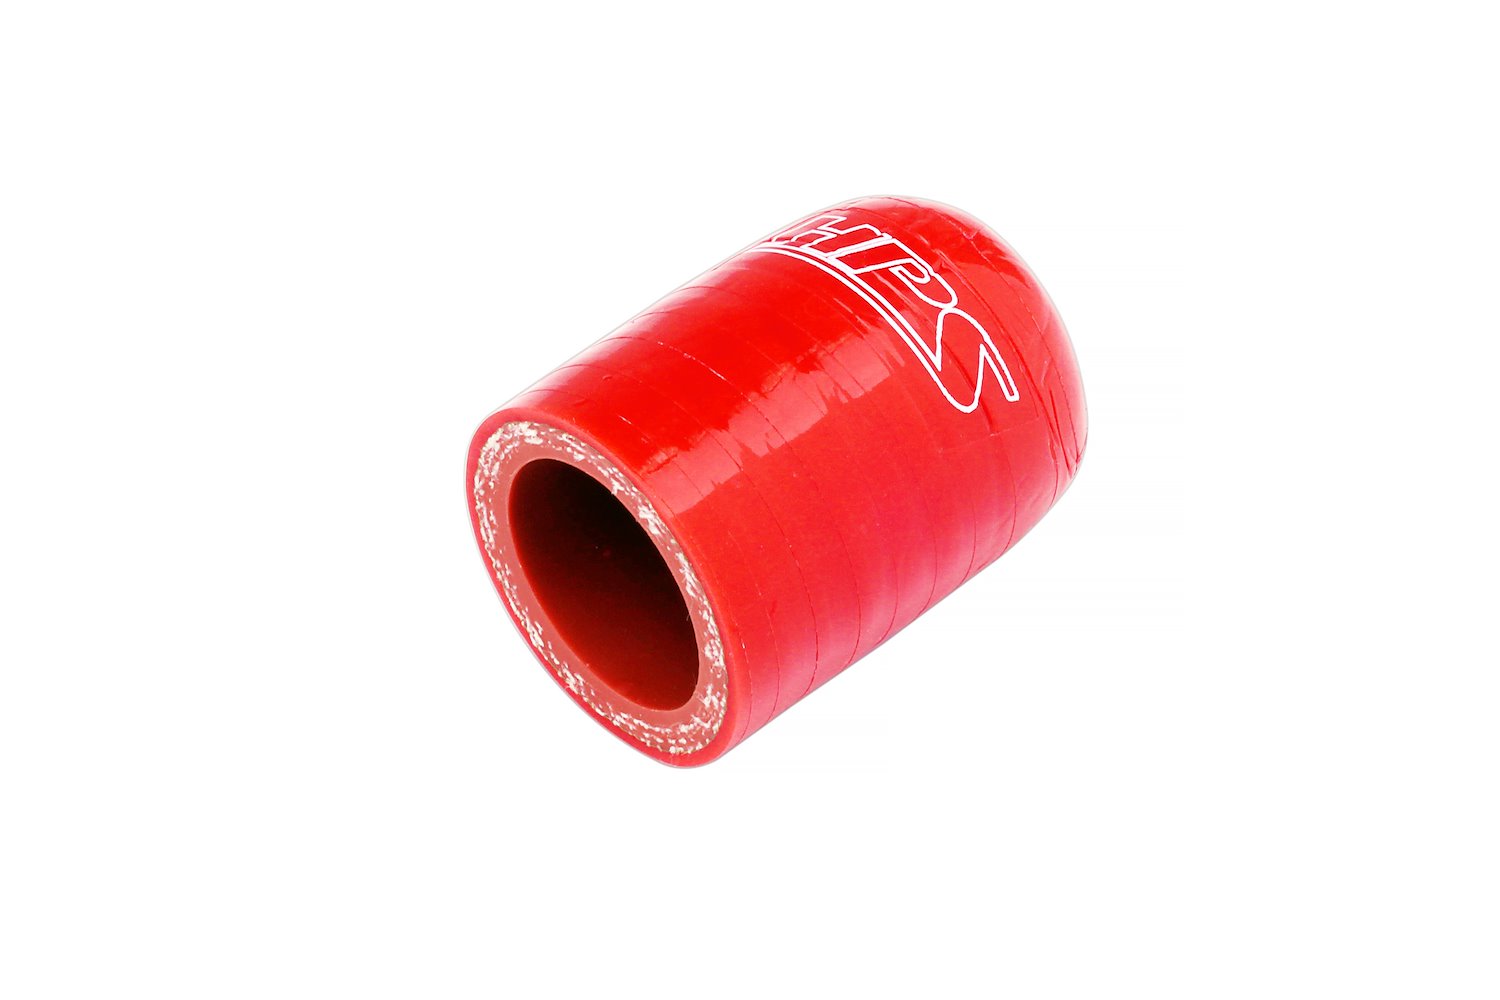 RSCC-050-RED Coolant Bypass Cap, 3-Ply Reinforced High-Temp. Silicone Bypass Cap, 1/2 in. ID, Red